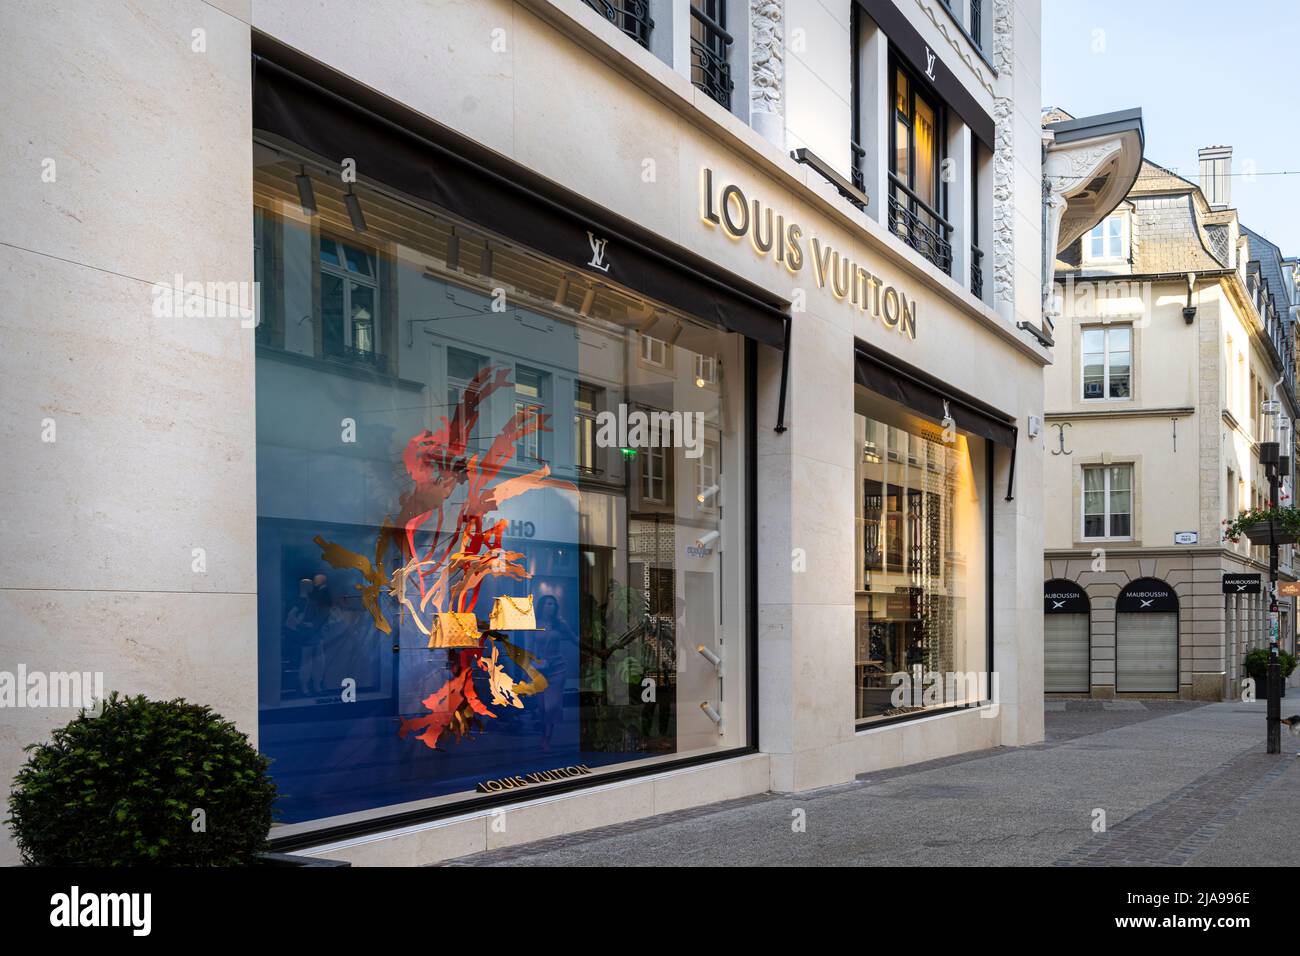 Bravern Mall's Louis Vuitton Store: A Showcase of Design and